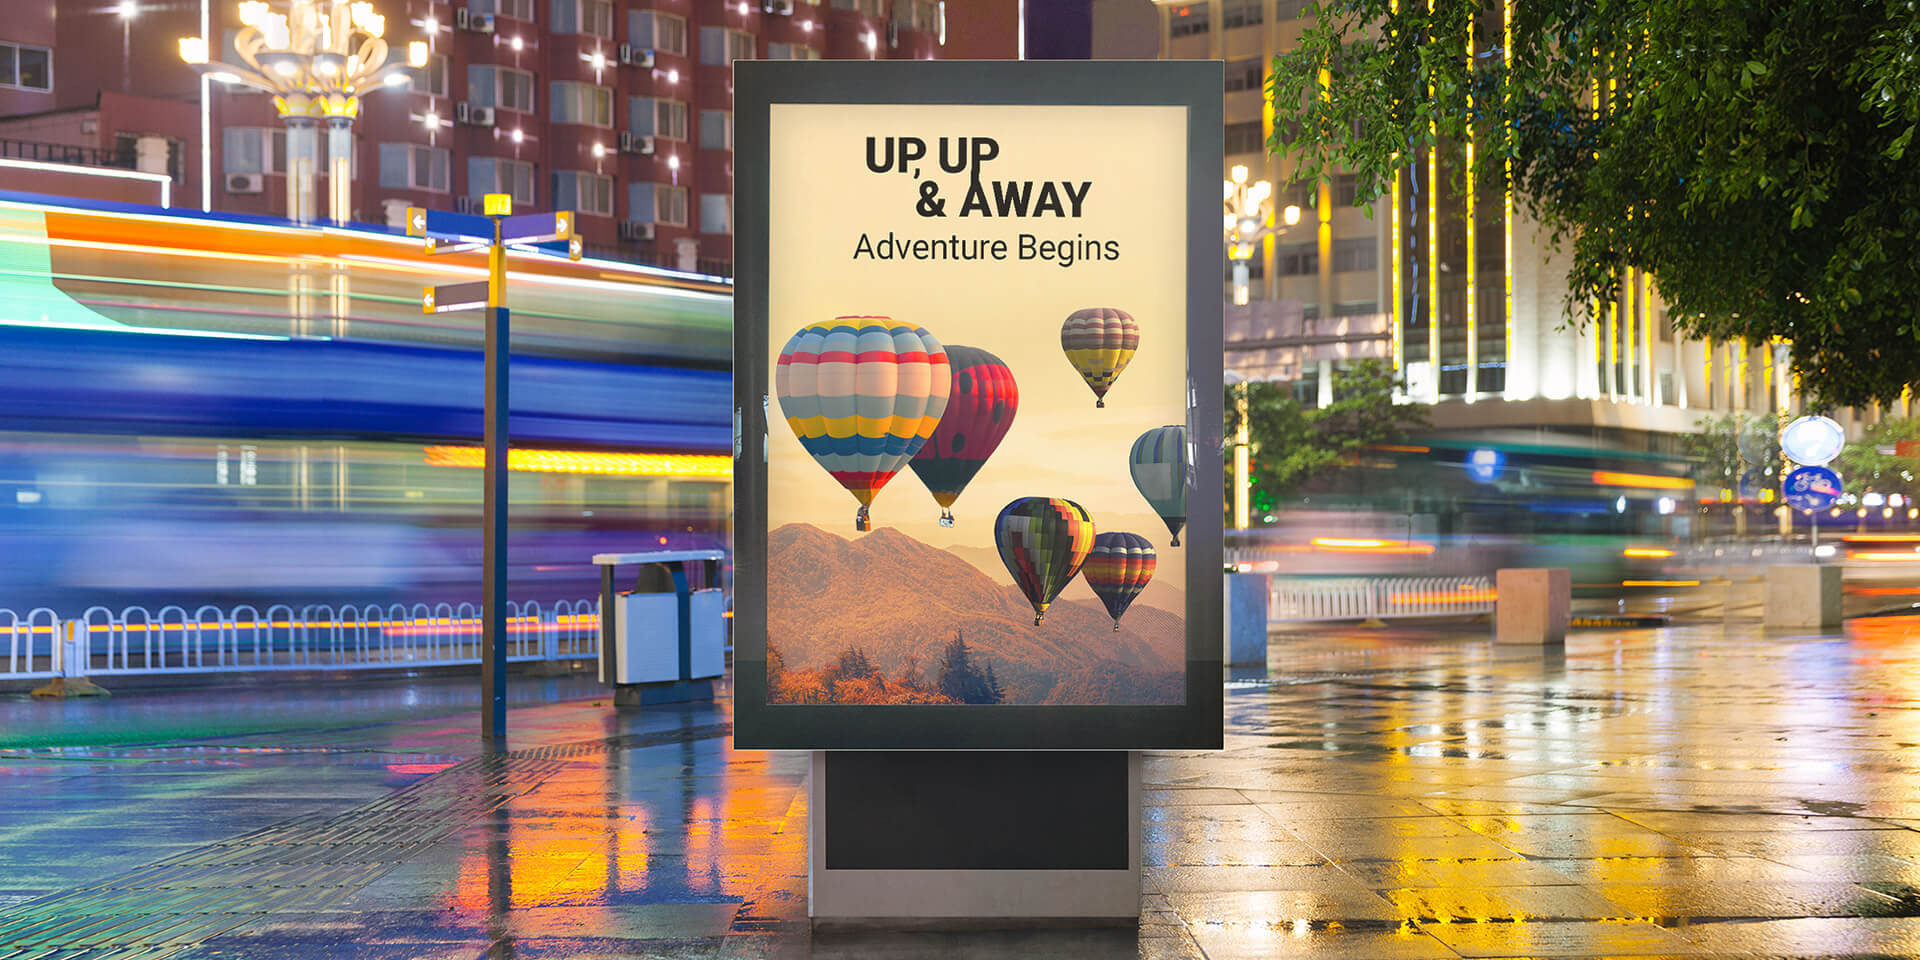 DOOH strategies for travel & tourism marketing campaigns